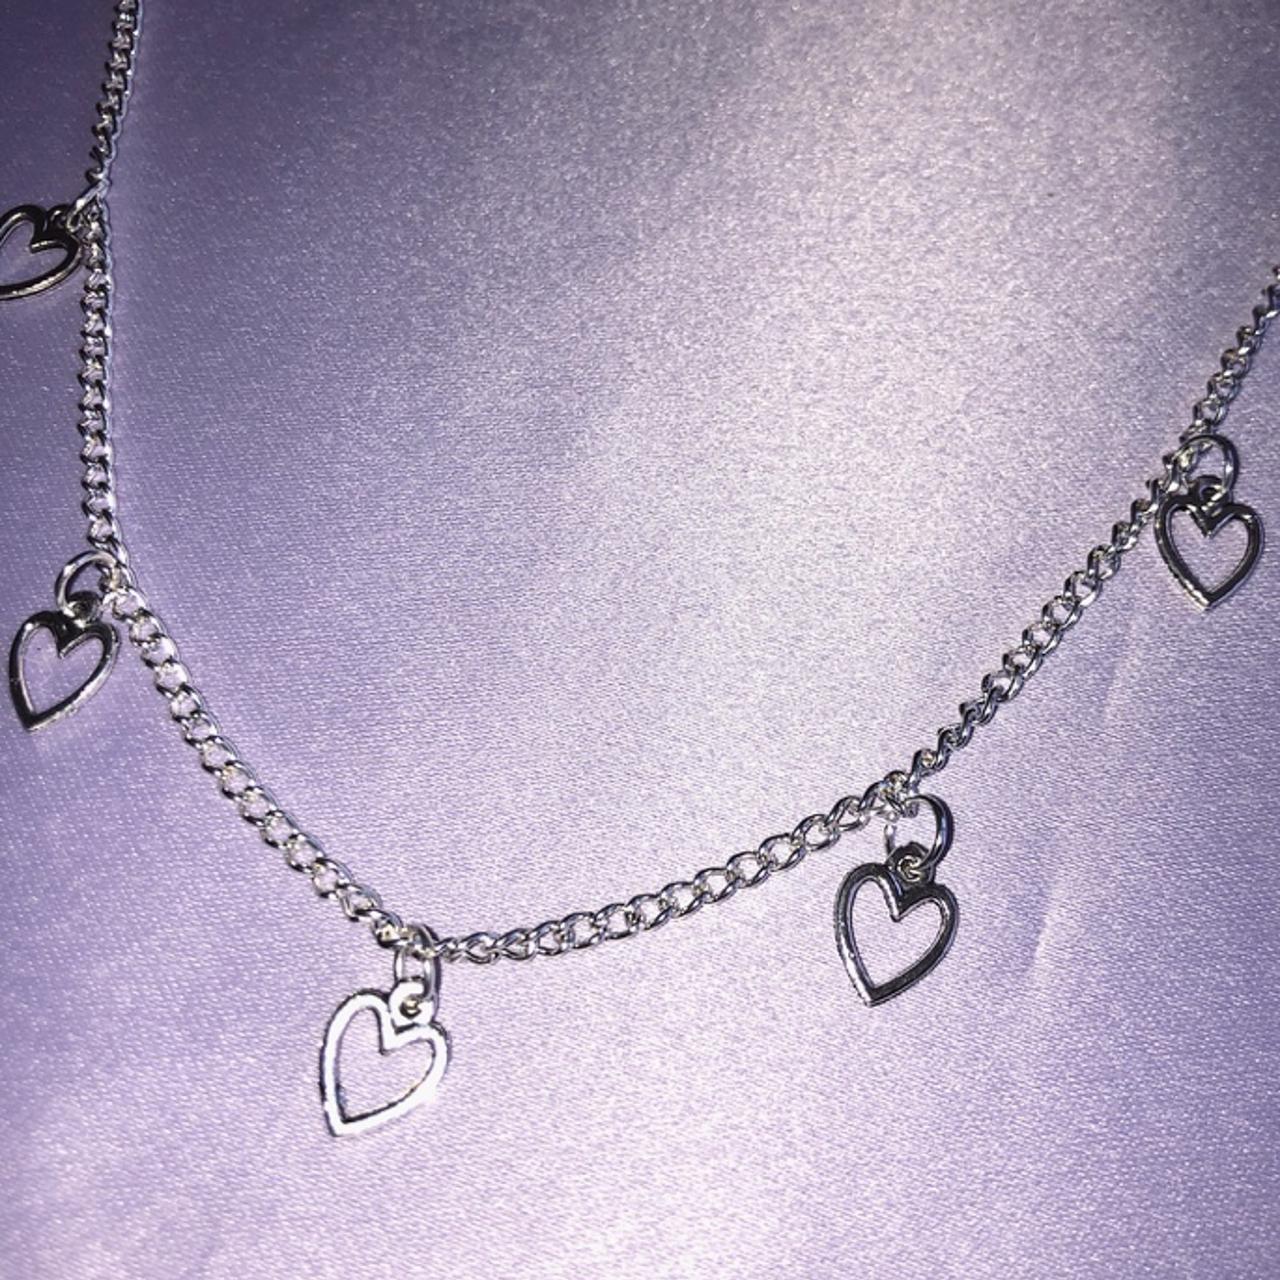 Handmade Silver Plated Small Heart Charm Necklace... - Depop